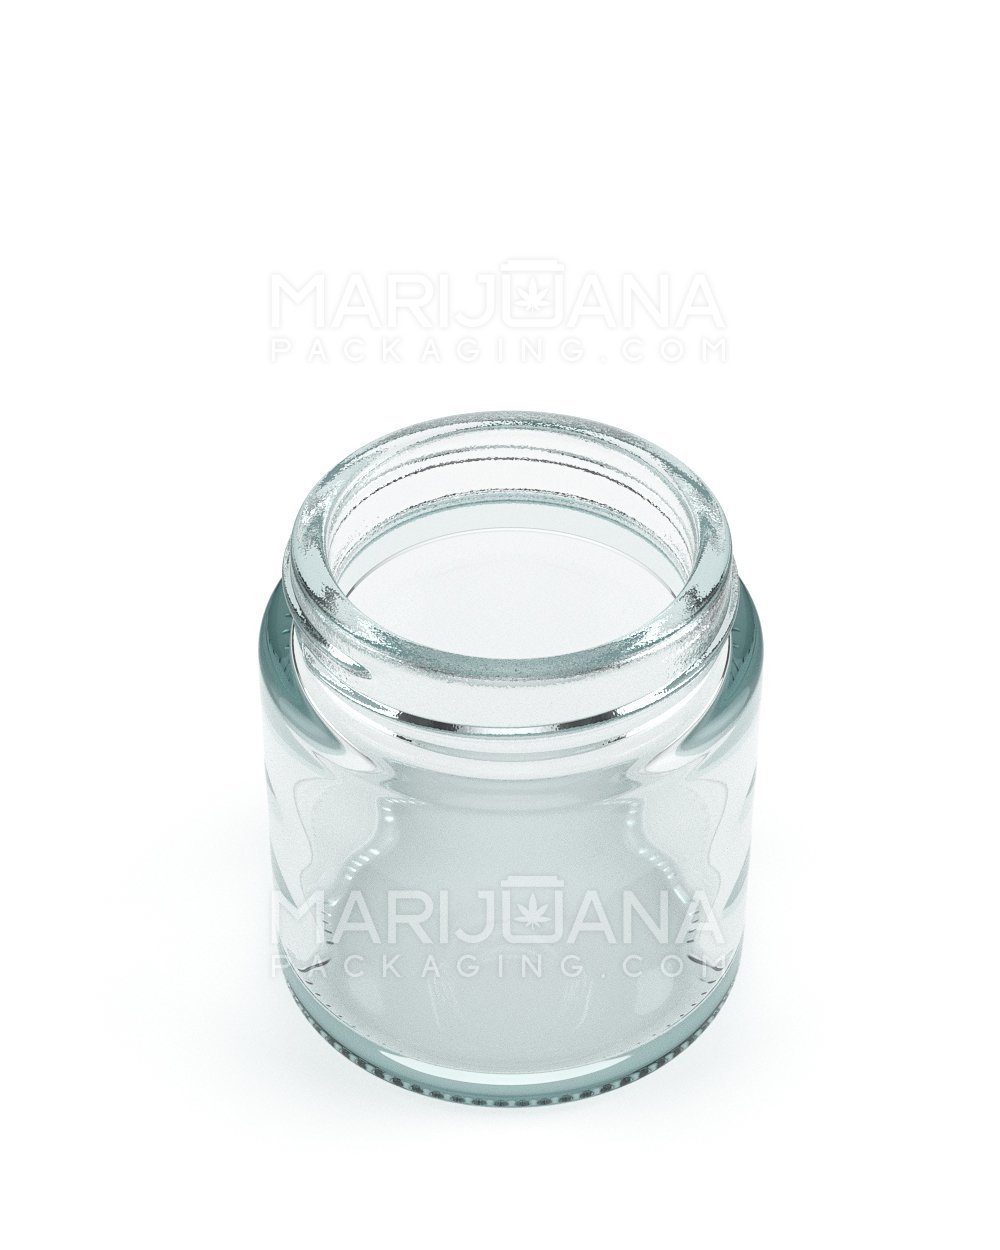 Straight Sided Clear Glass Jars | 50mm - 3oz - 100 Count - 2